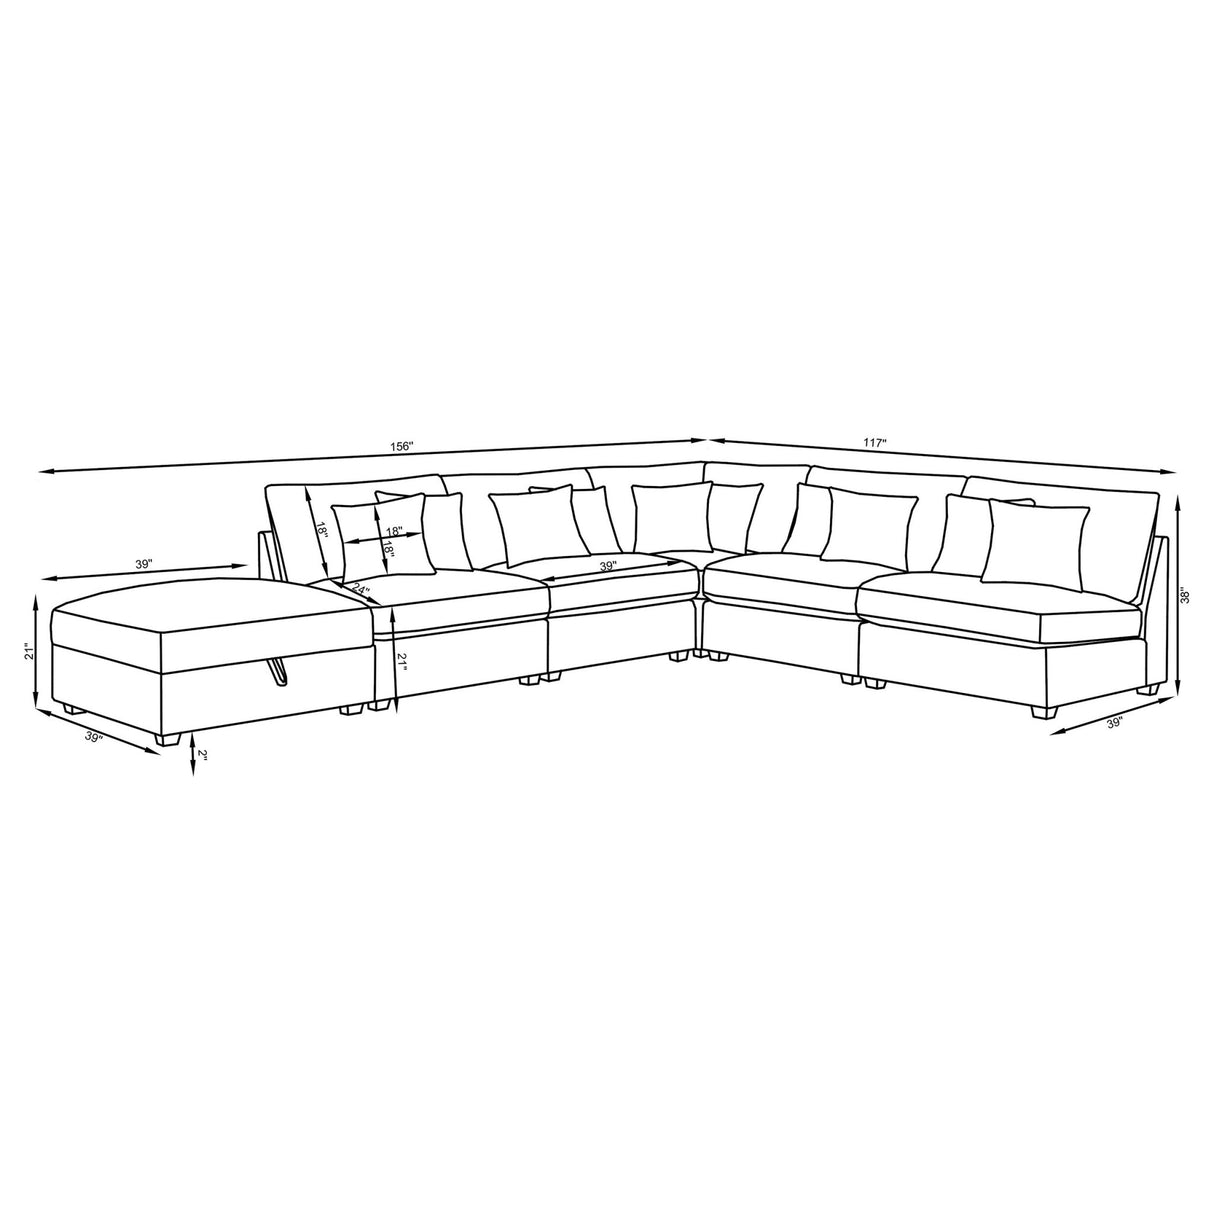 4 Pc Sectional - Cambria 4-piece Upholstered Modular Sectional Grey